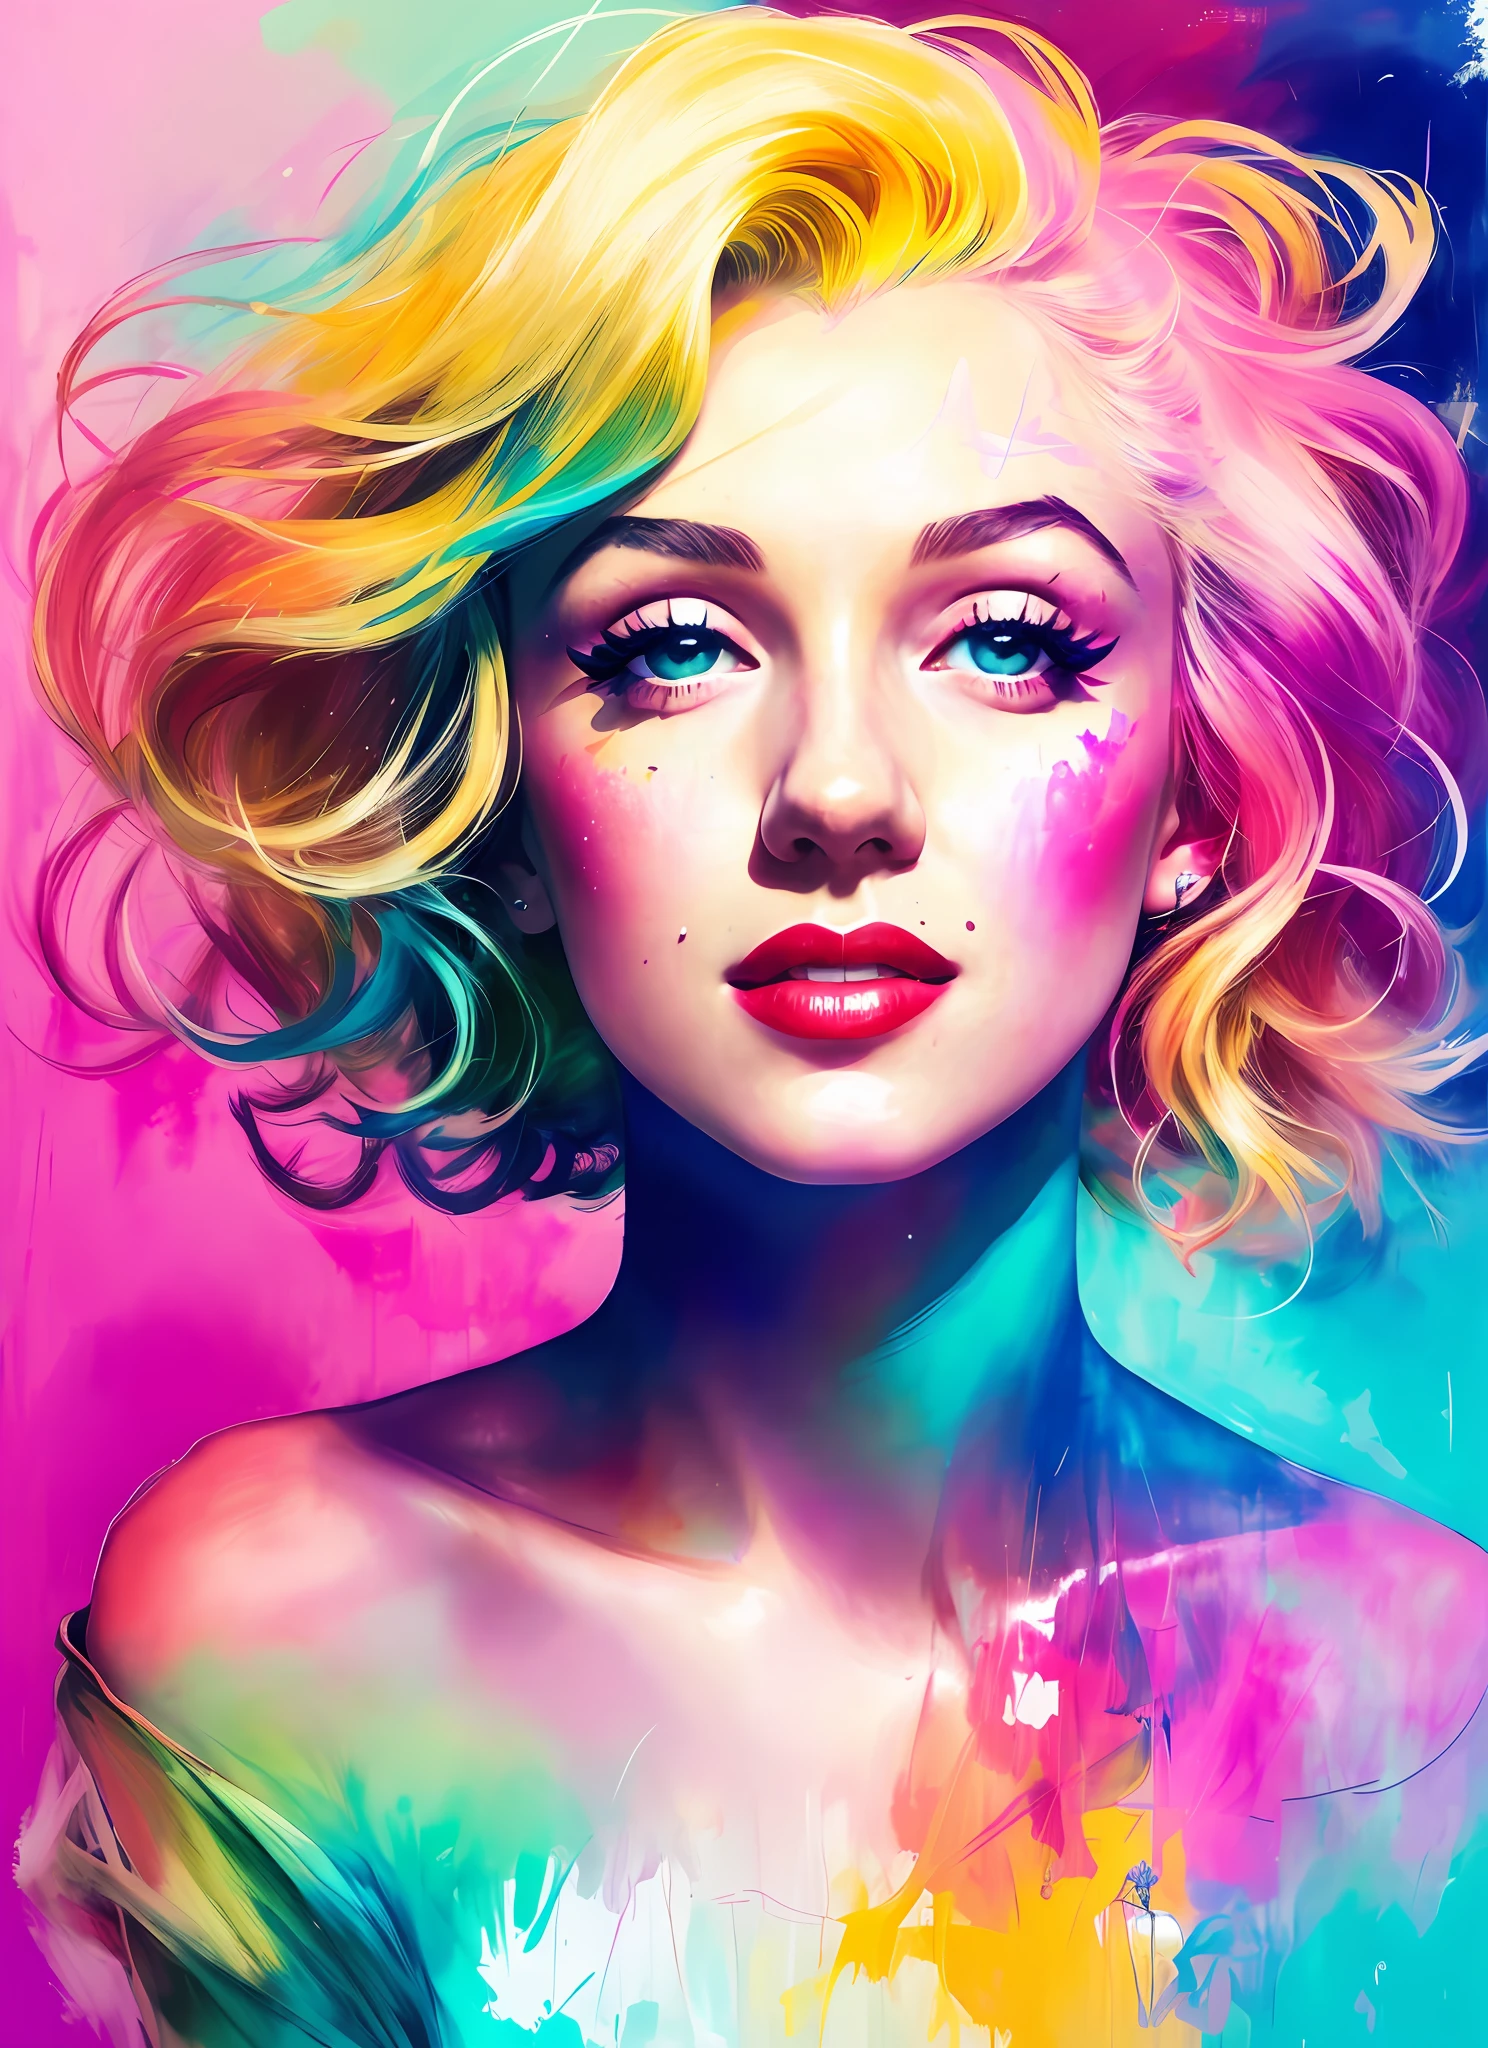 a painting by mse Marilyn Monroe by agnes cecile,1 girl, solo, luminous design, pastel colours, mute color,  ink drips, autumn lights, Create a digital art work in pop art style, featureing a vibrant and confident woman with bold makeup and colorfull fashion, cinematic color scheme, surrounded by abstract flower patterns, energtic brush strokes, the mood should be dynamic.